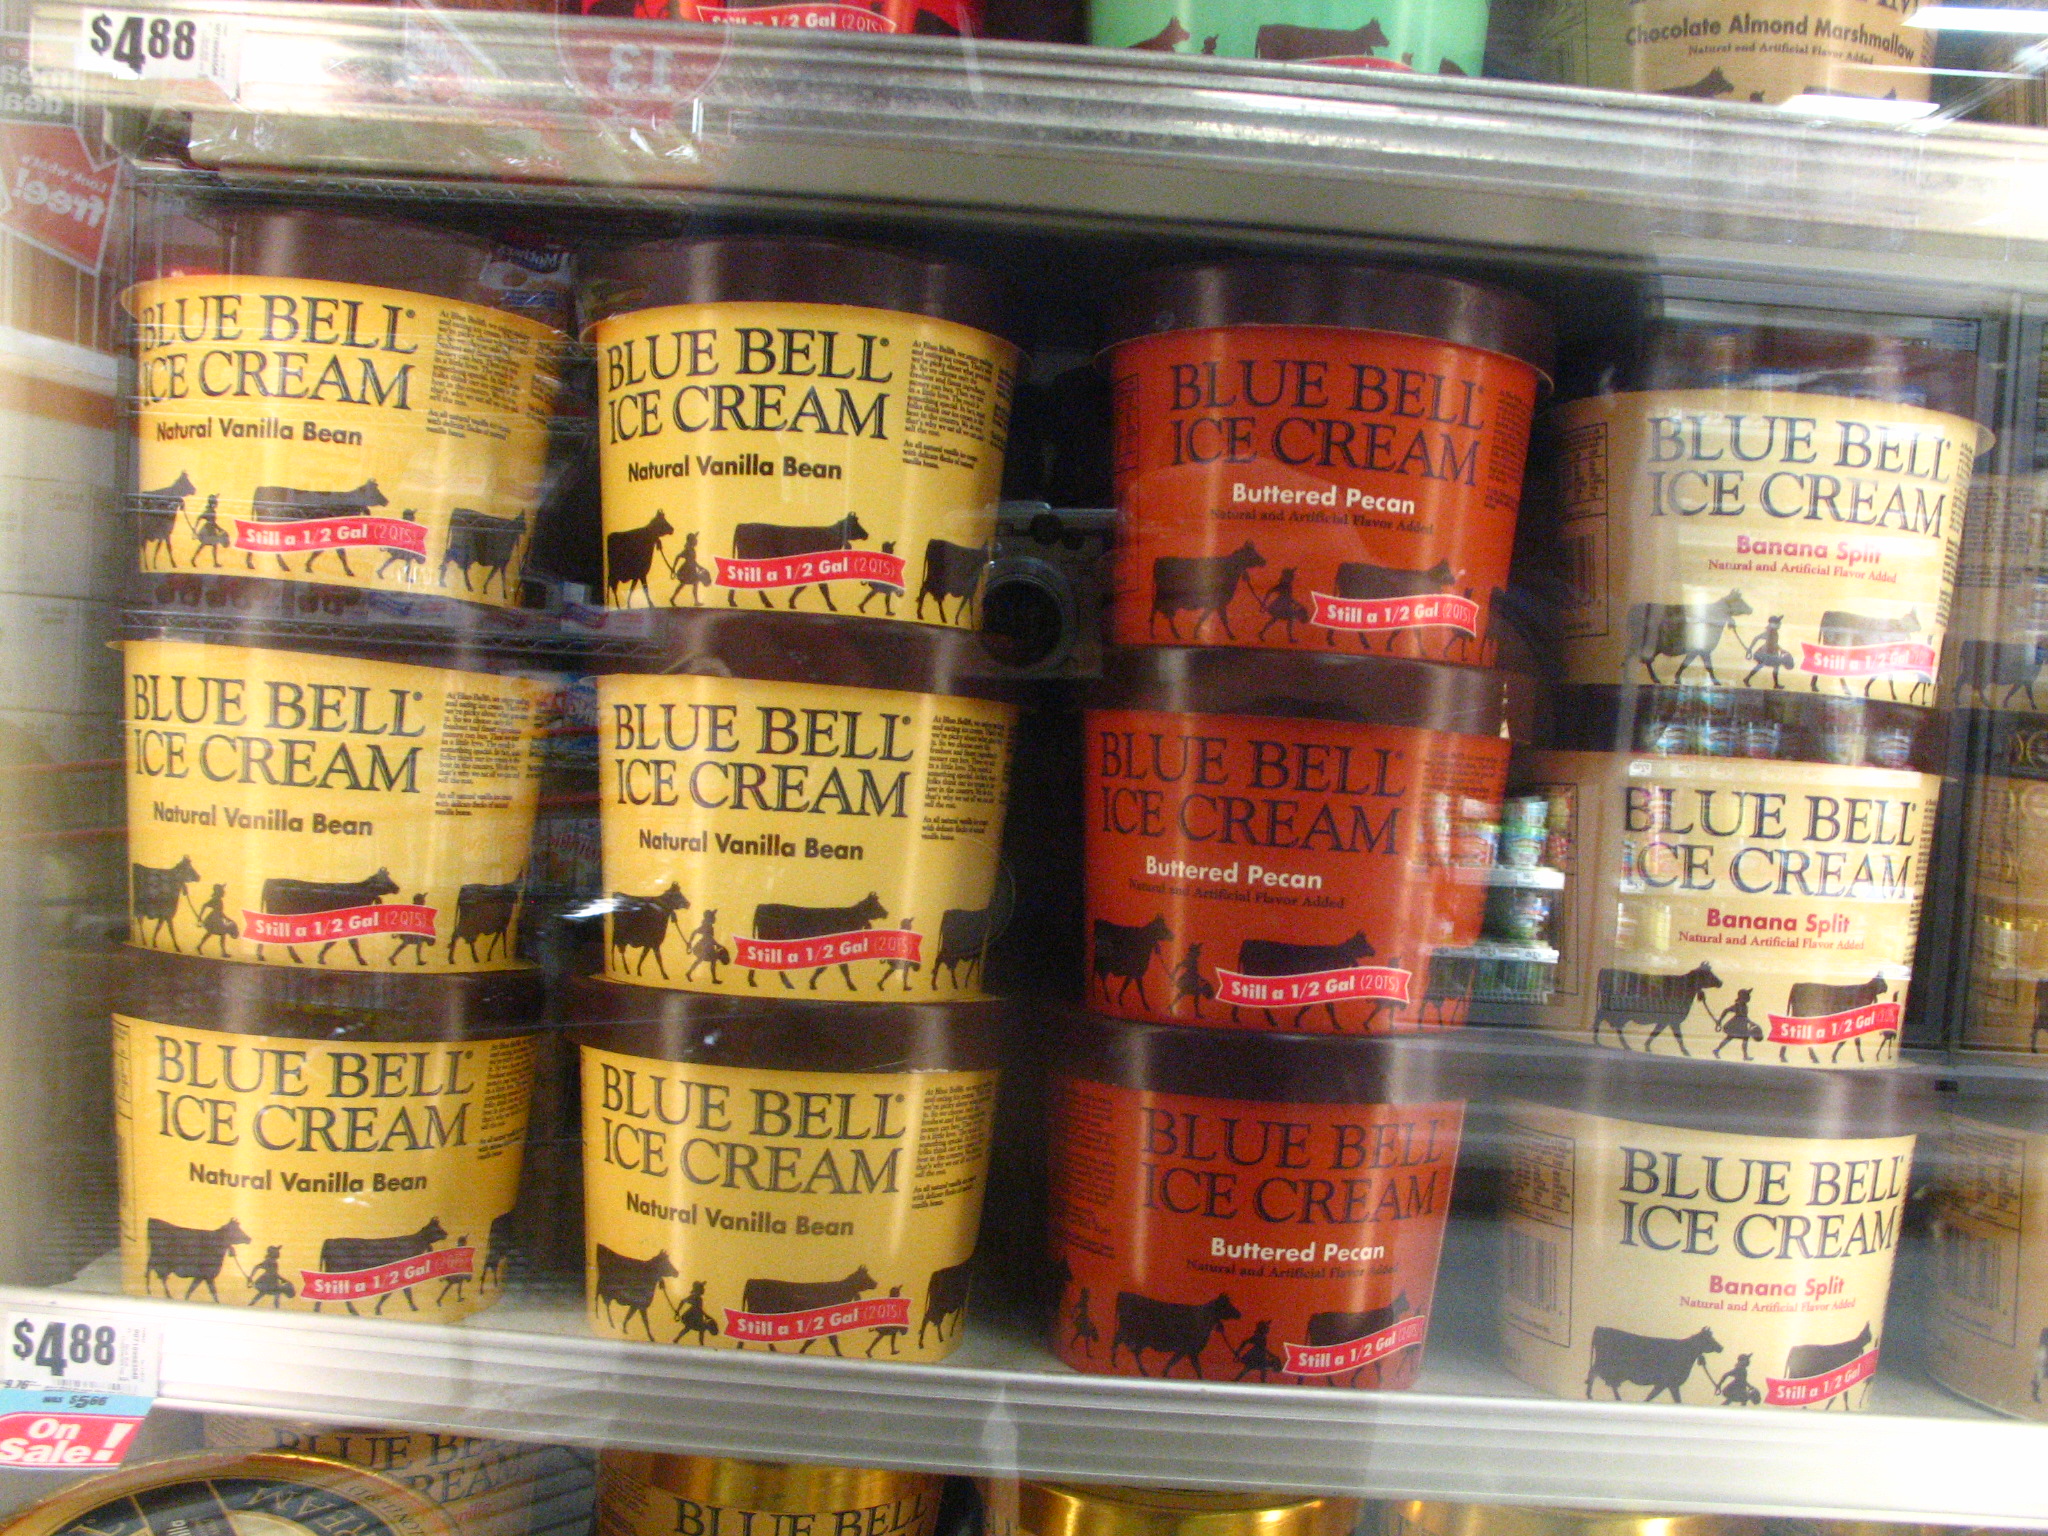 several different flavors of ice cream stacked in rows on the shelf